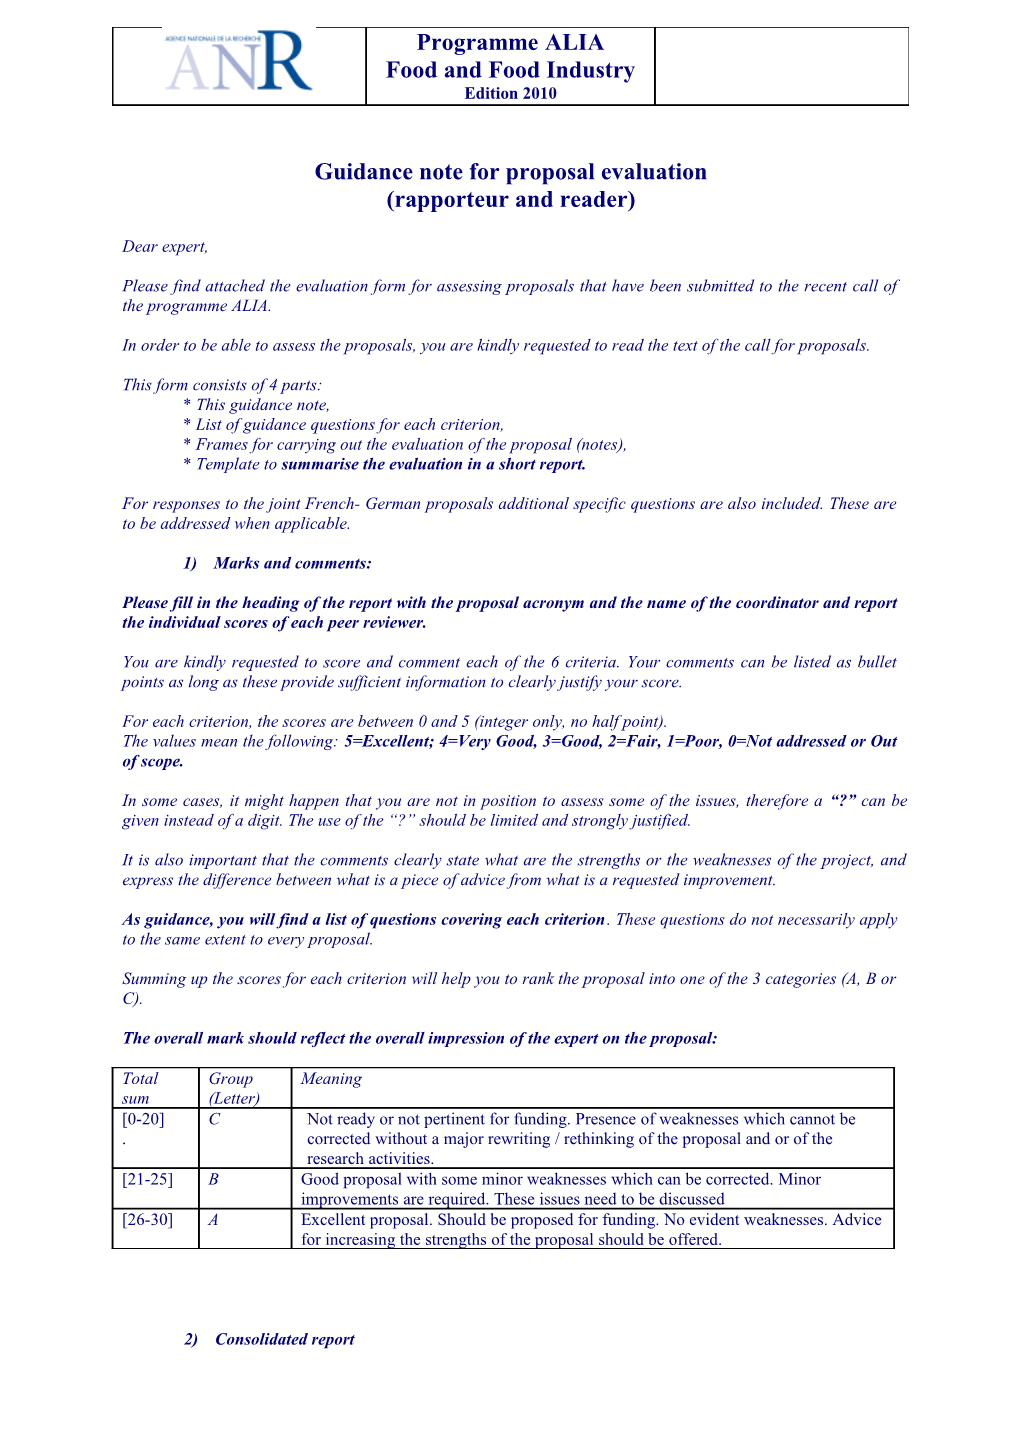 Guidance Note for Proposal Evaluation